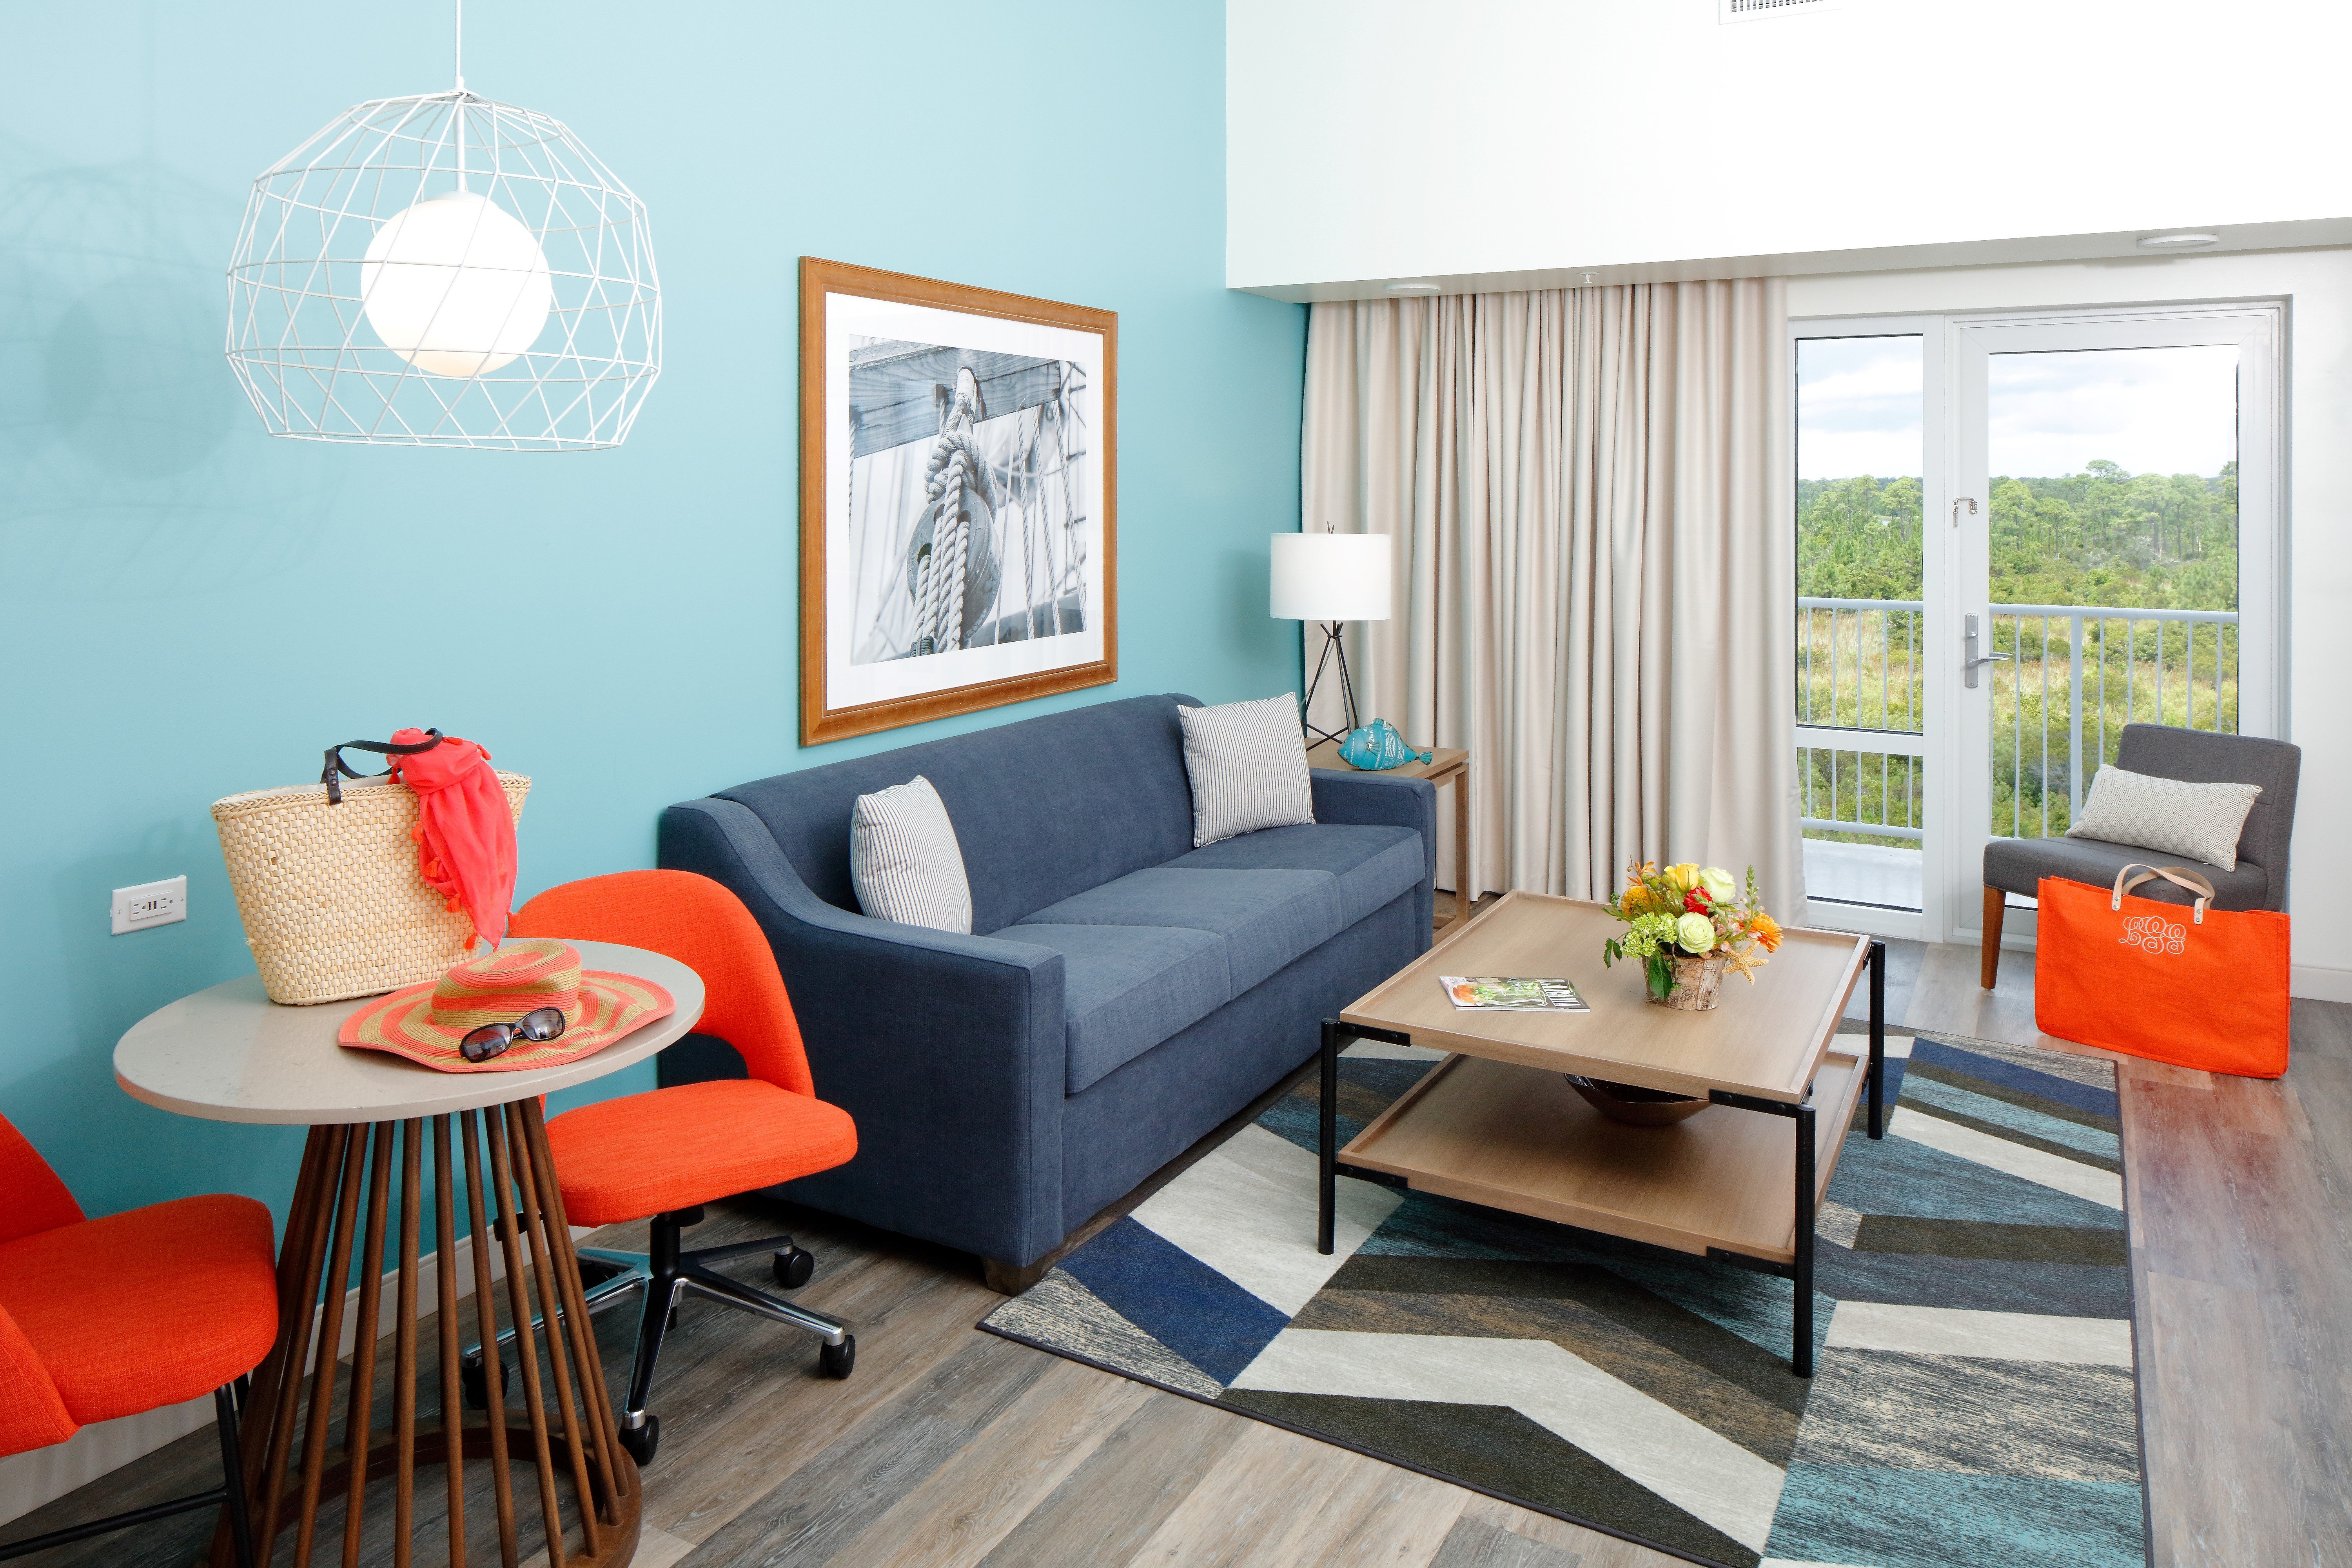 Our charming suite living rooms will help you unwind